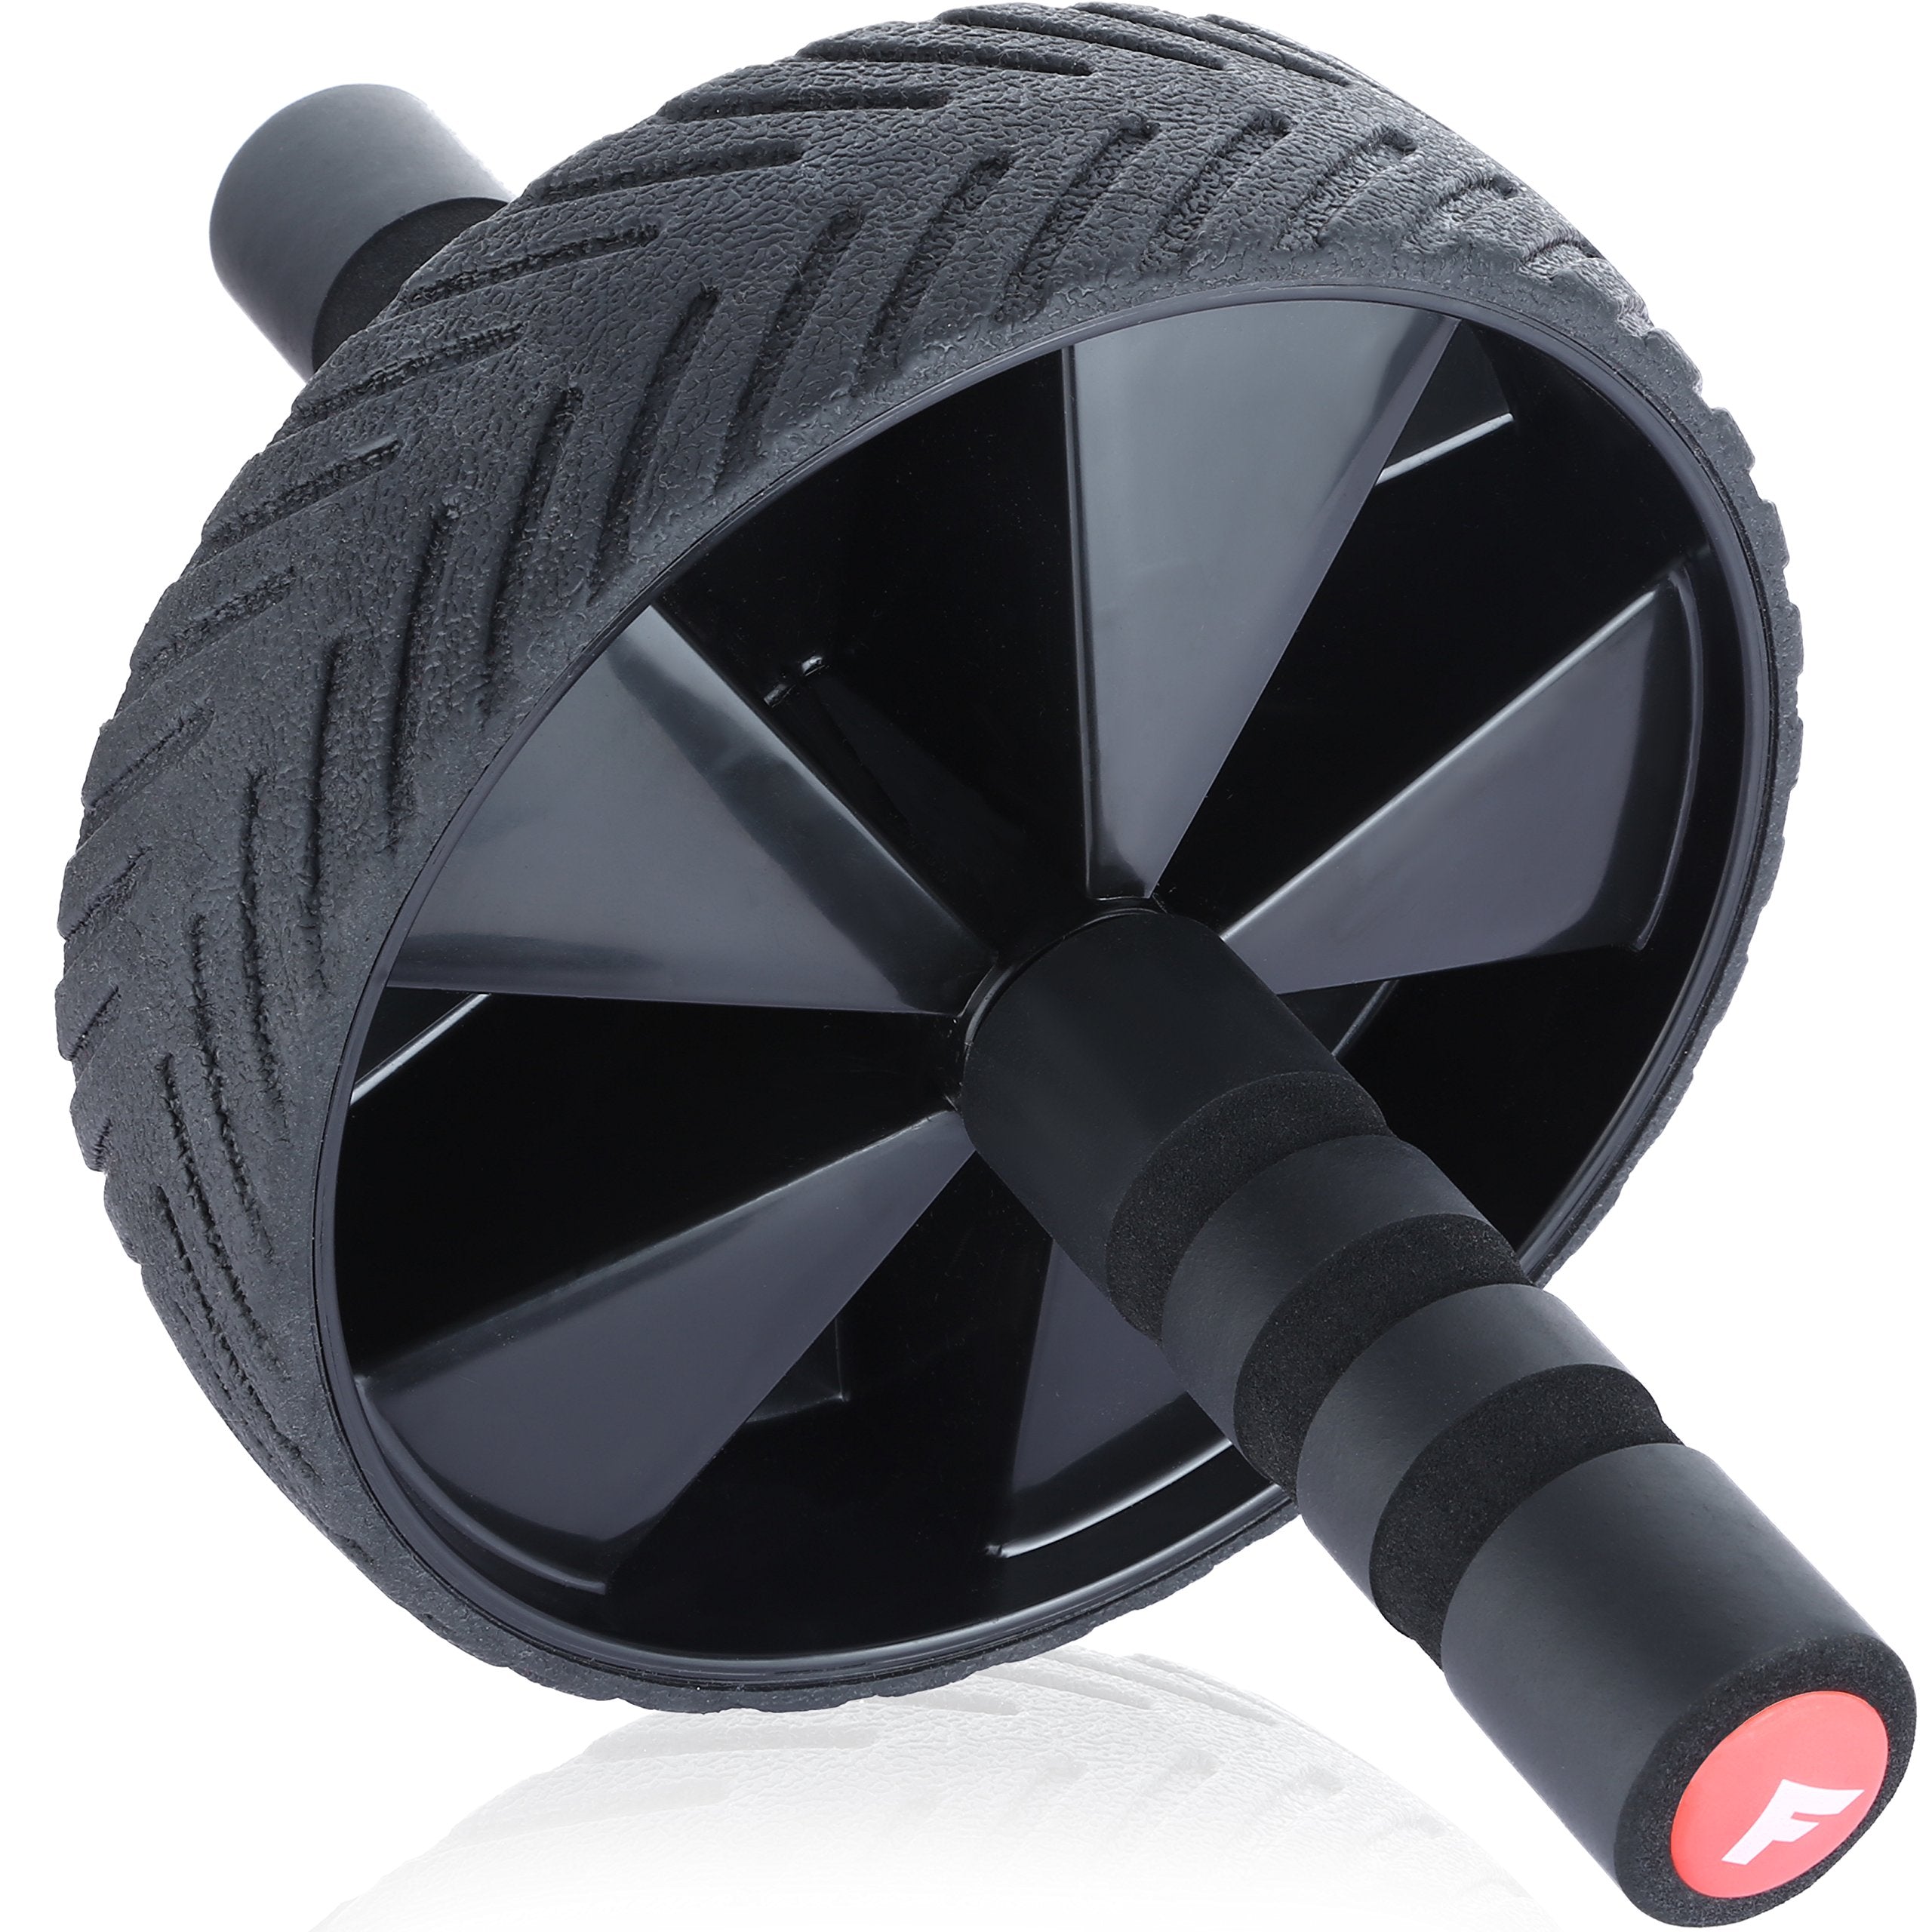 Ab Roller for Abs Workout - Ab Roller Wheel Exercise Equipment - Ab Wheel Exercise Equipment - Ab Wheel Roller for Home Gym - Ab Machine for Ab Workout - Ab Workout Equipment - Abs Roller Ab Trainer